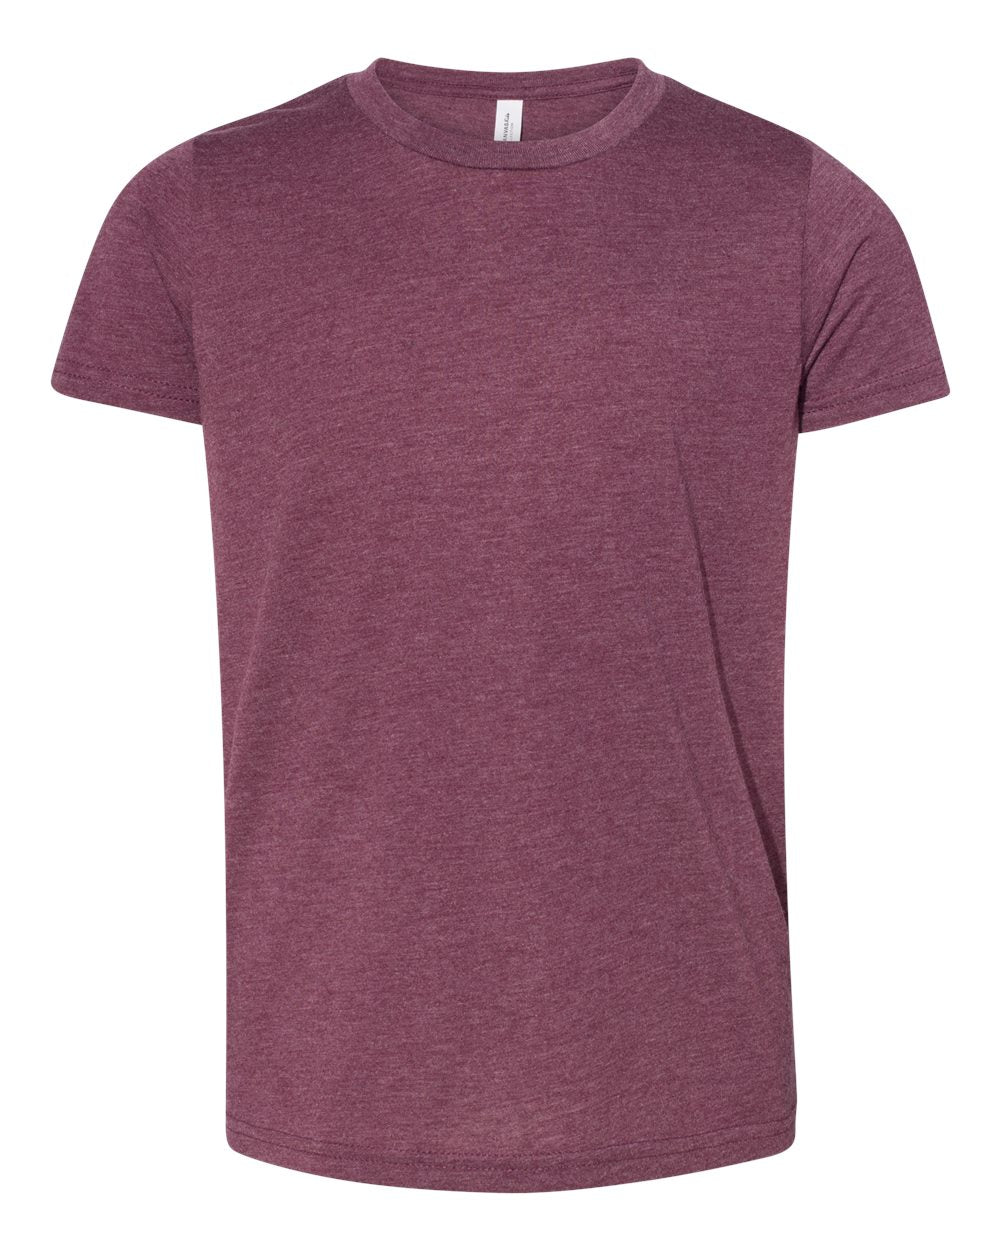 Bella + Canvas Youth Triblend Tee (3413y) in Maroon Triblend